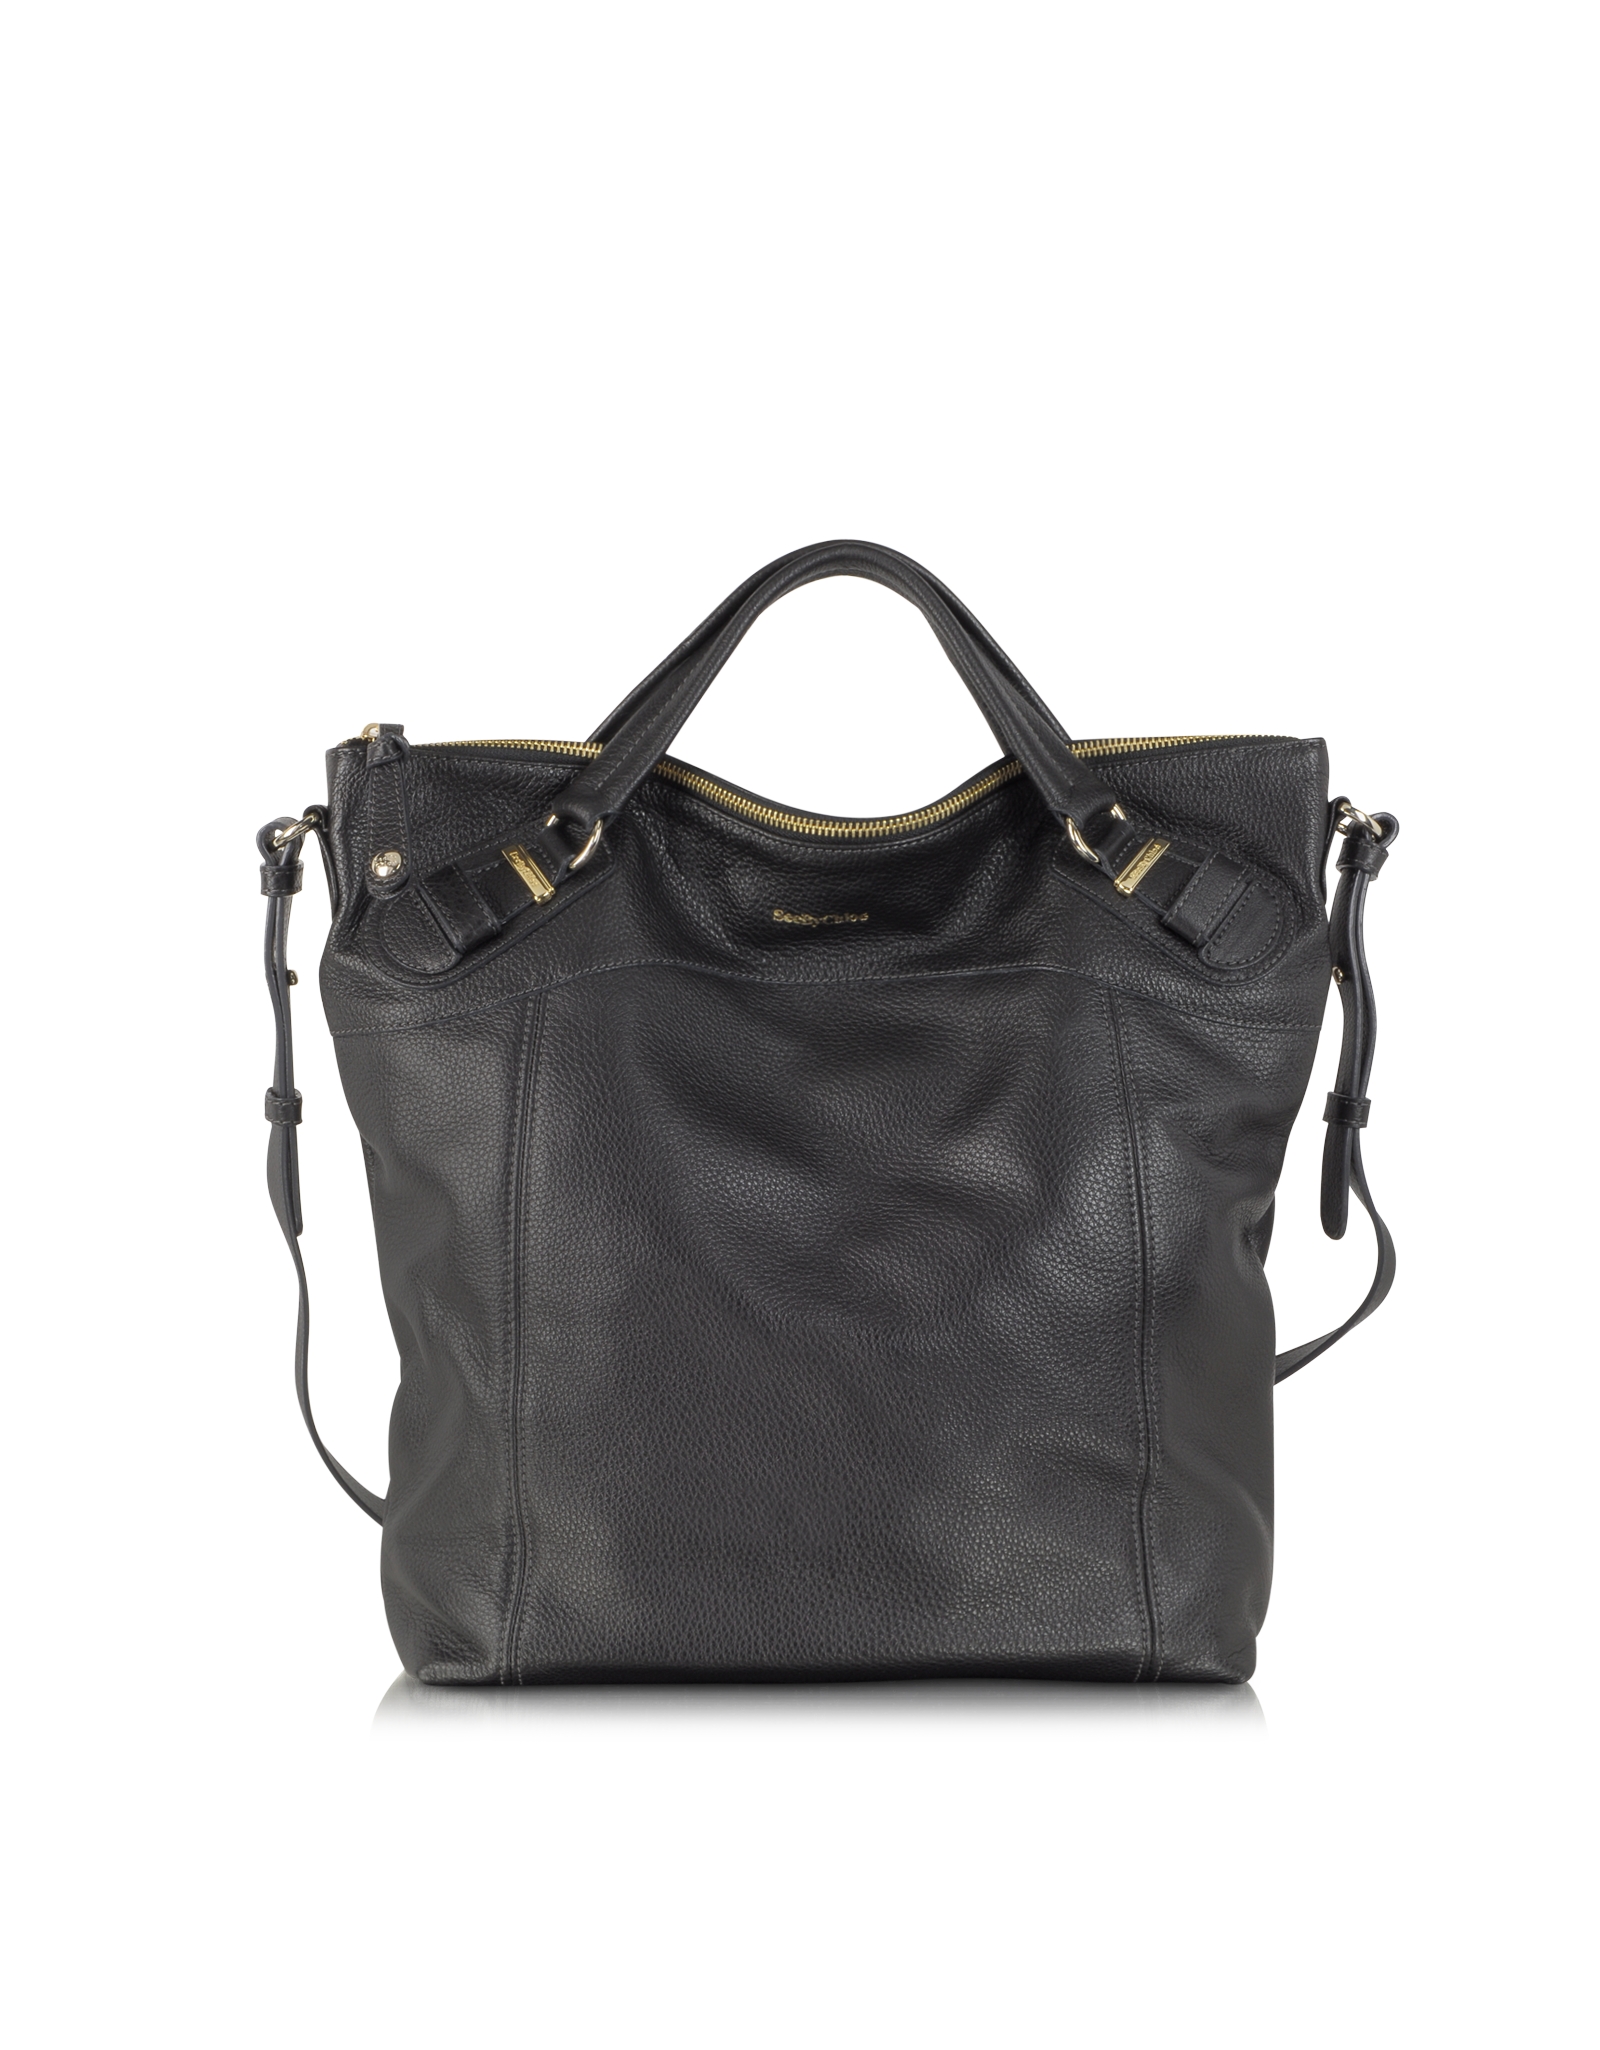 Chloé Black Leather Tote with Shoulder Strap in Black | Lyst